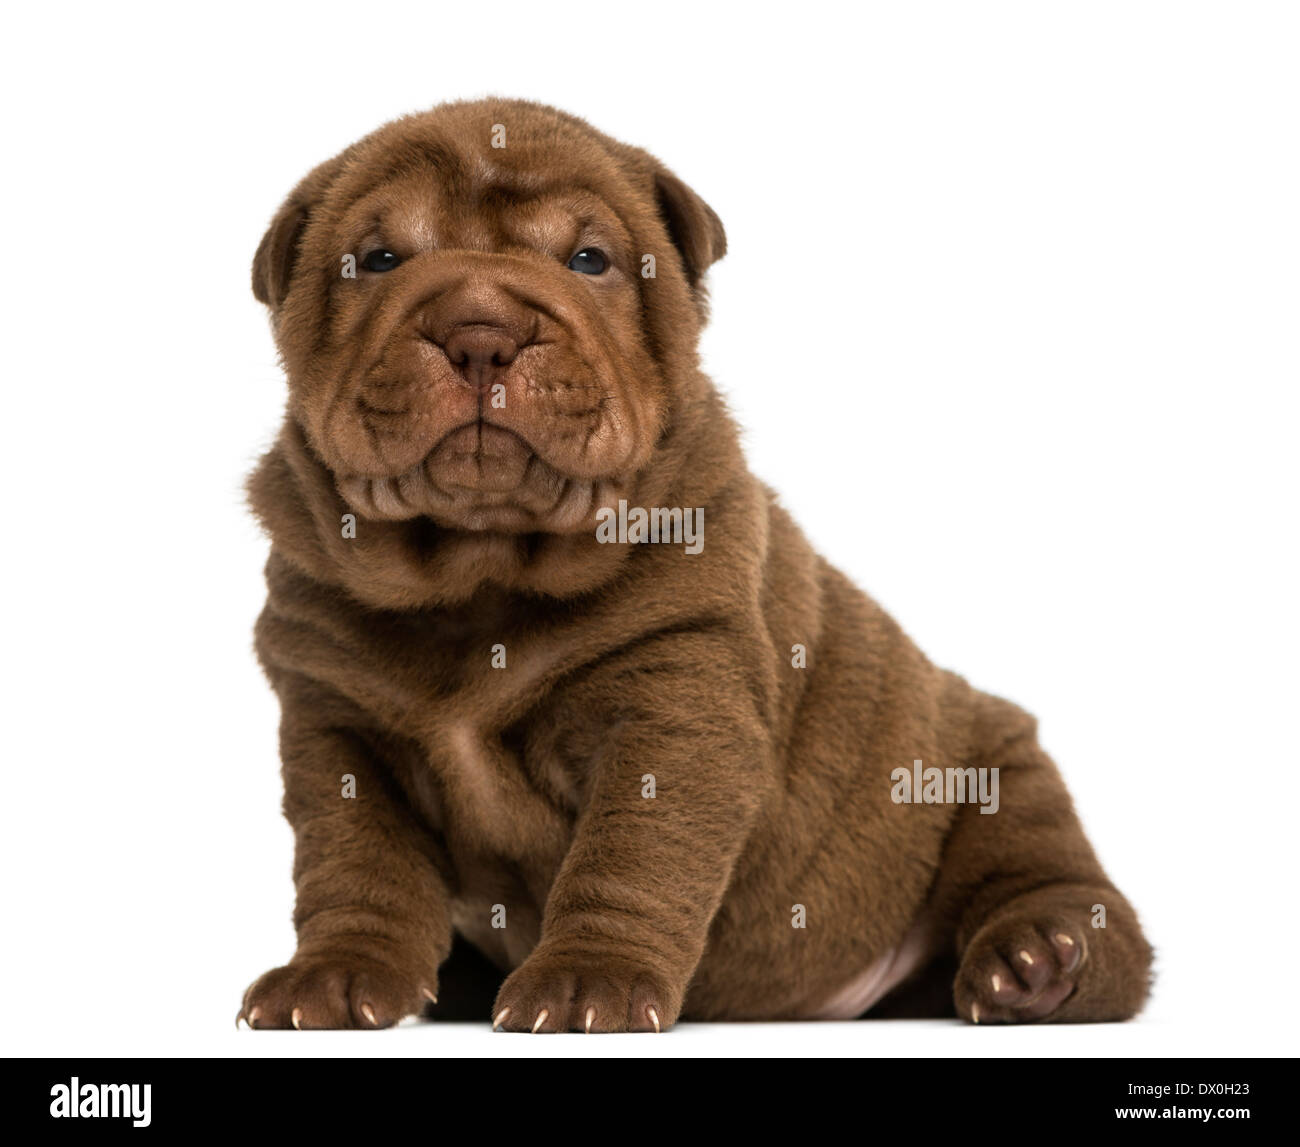 Shar Pei puppy sitting, looking at the camera against white background Stock Photo